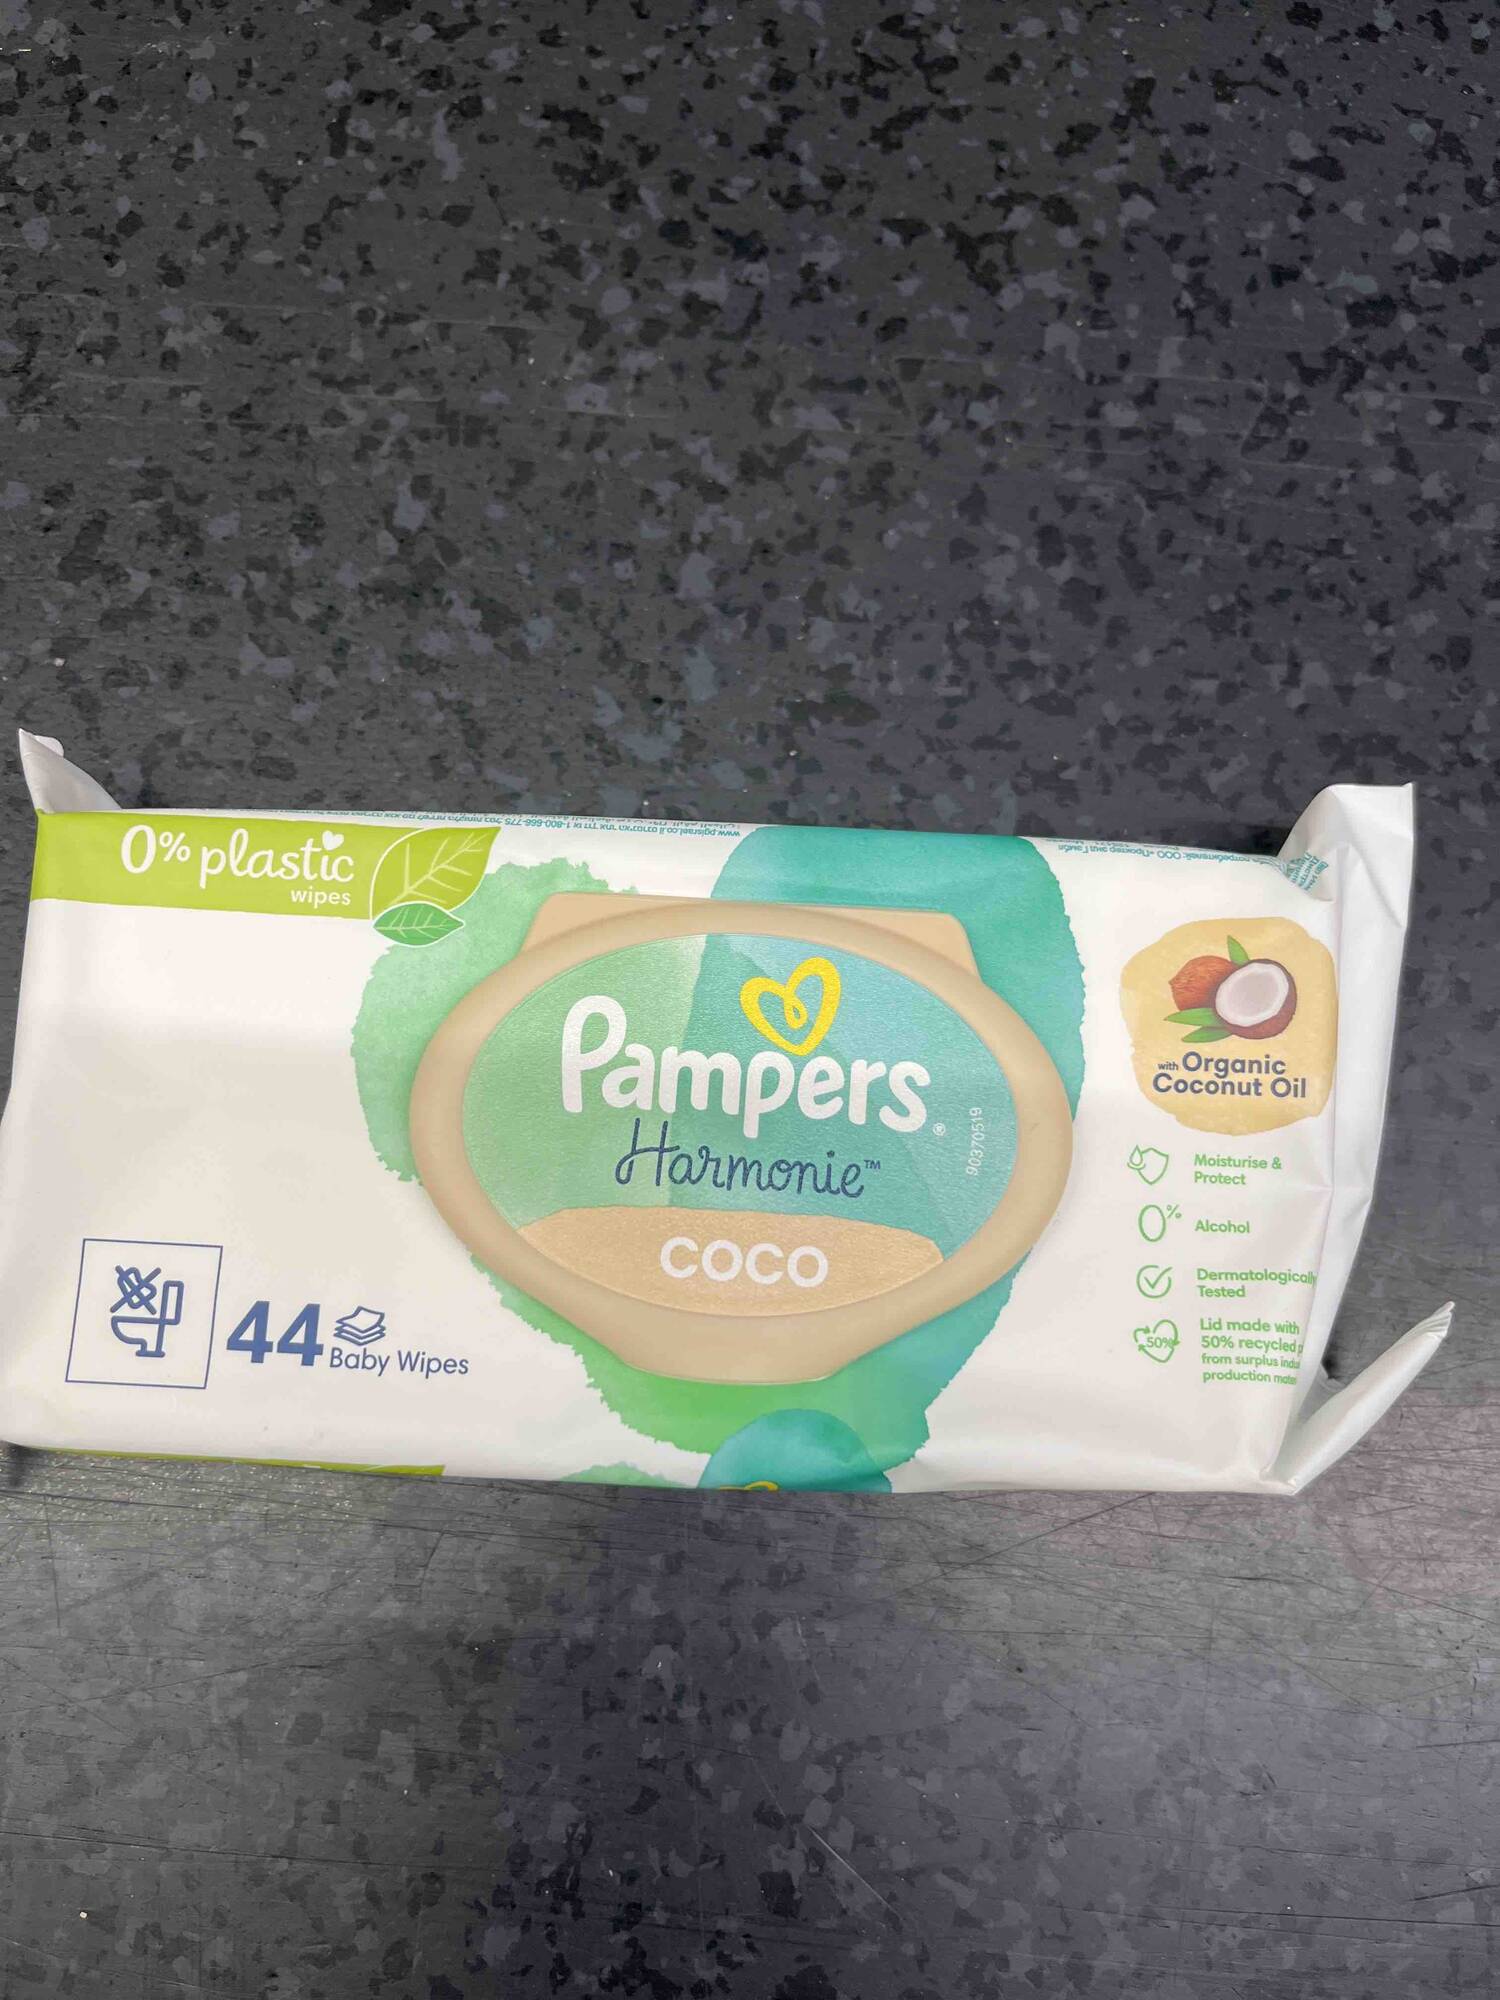 PAMPERS - Harmonie coco - Baby wipes